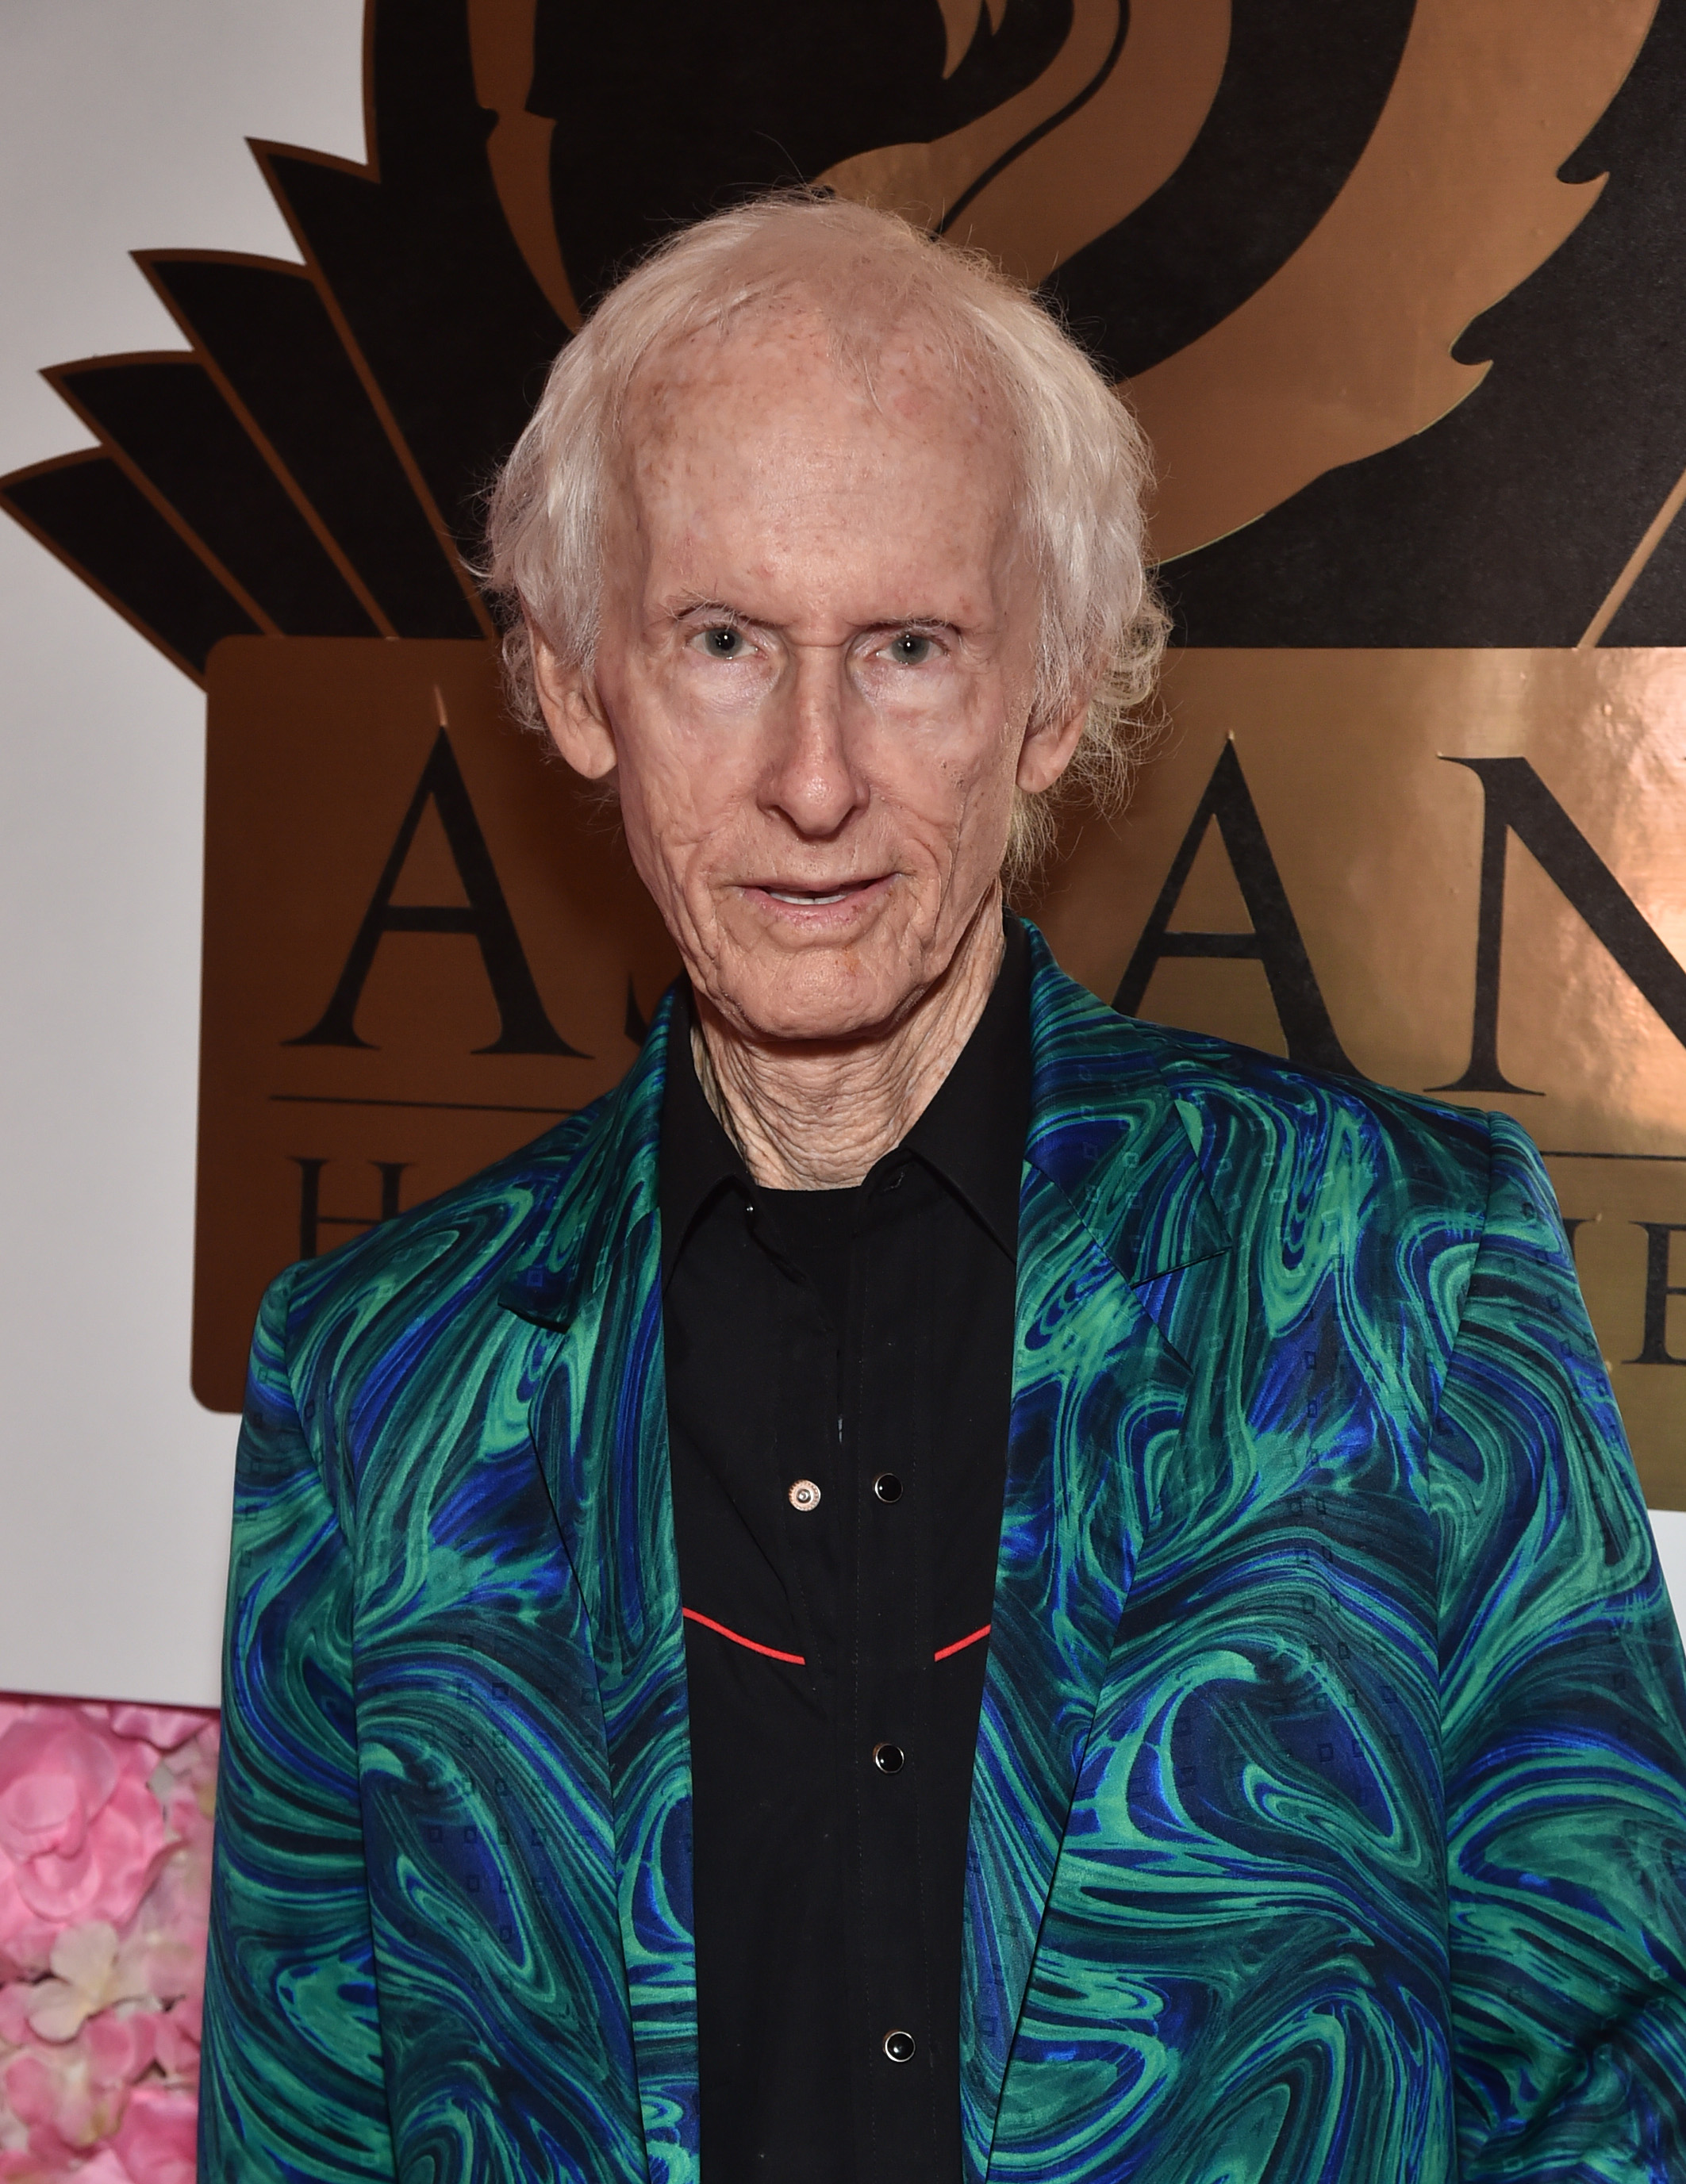 Robby Krieger photo 2